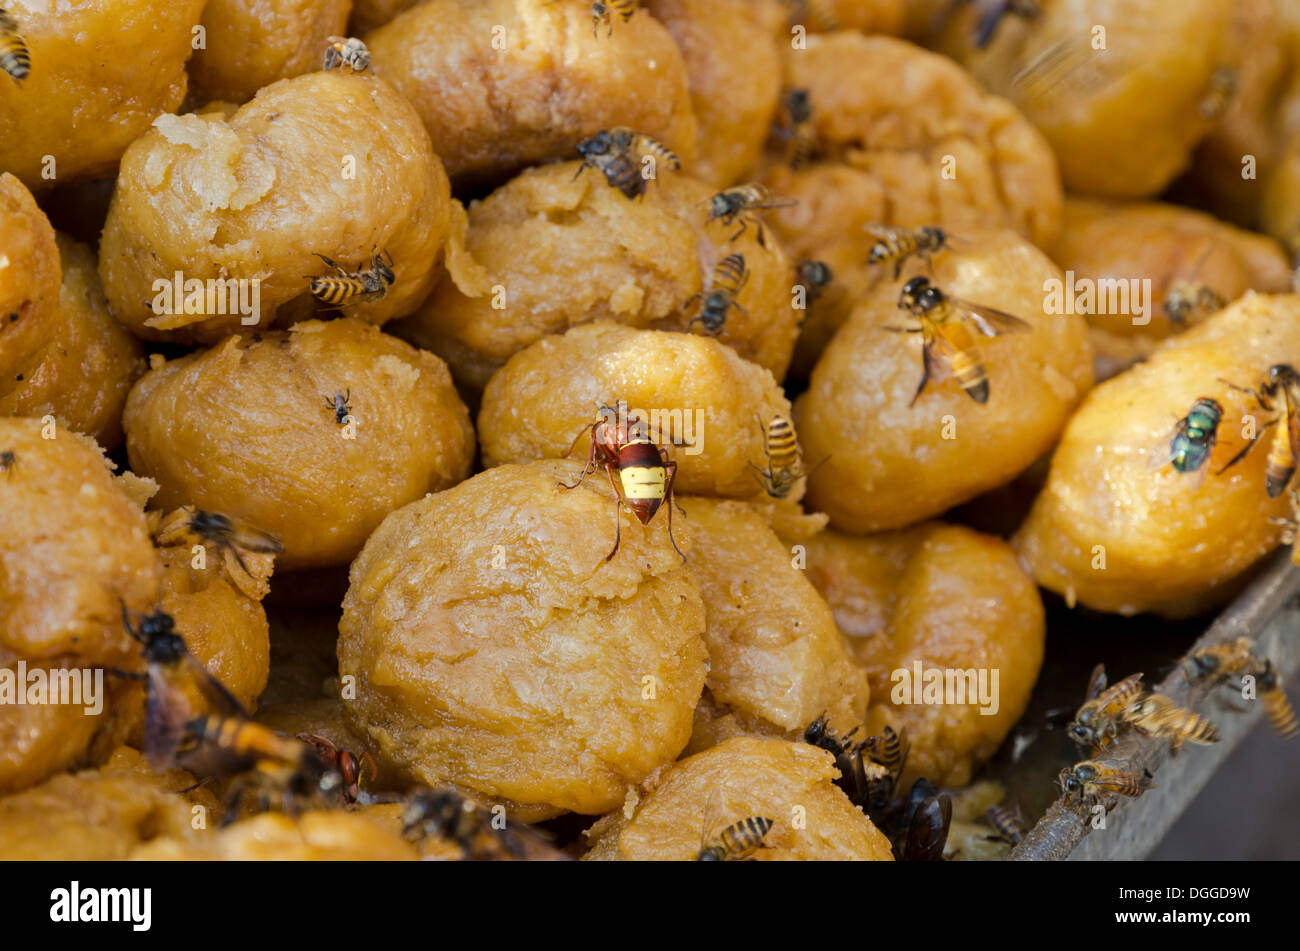 Sweets, with flies and wasps, for sale at the market of Allahabad, India, Asia Stock Photo